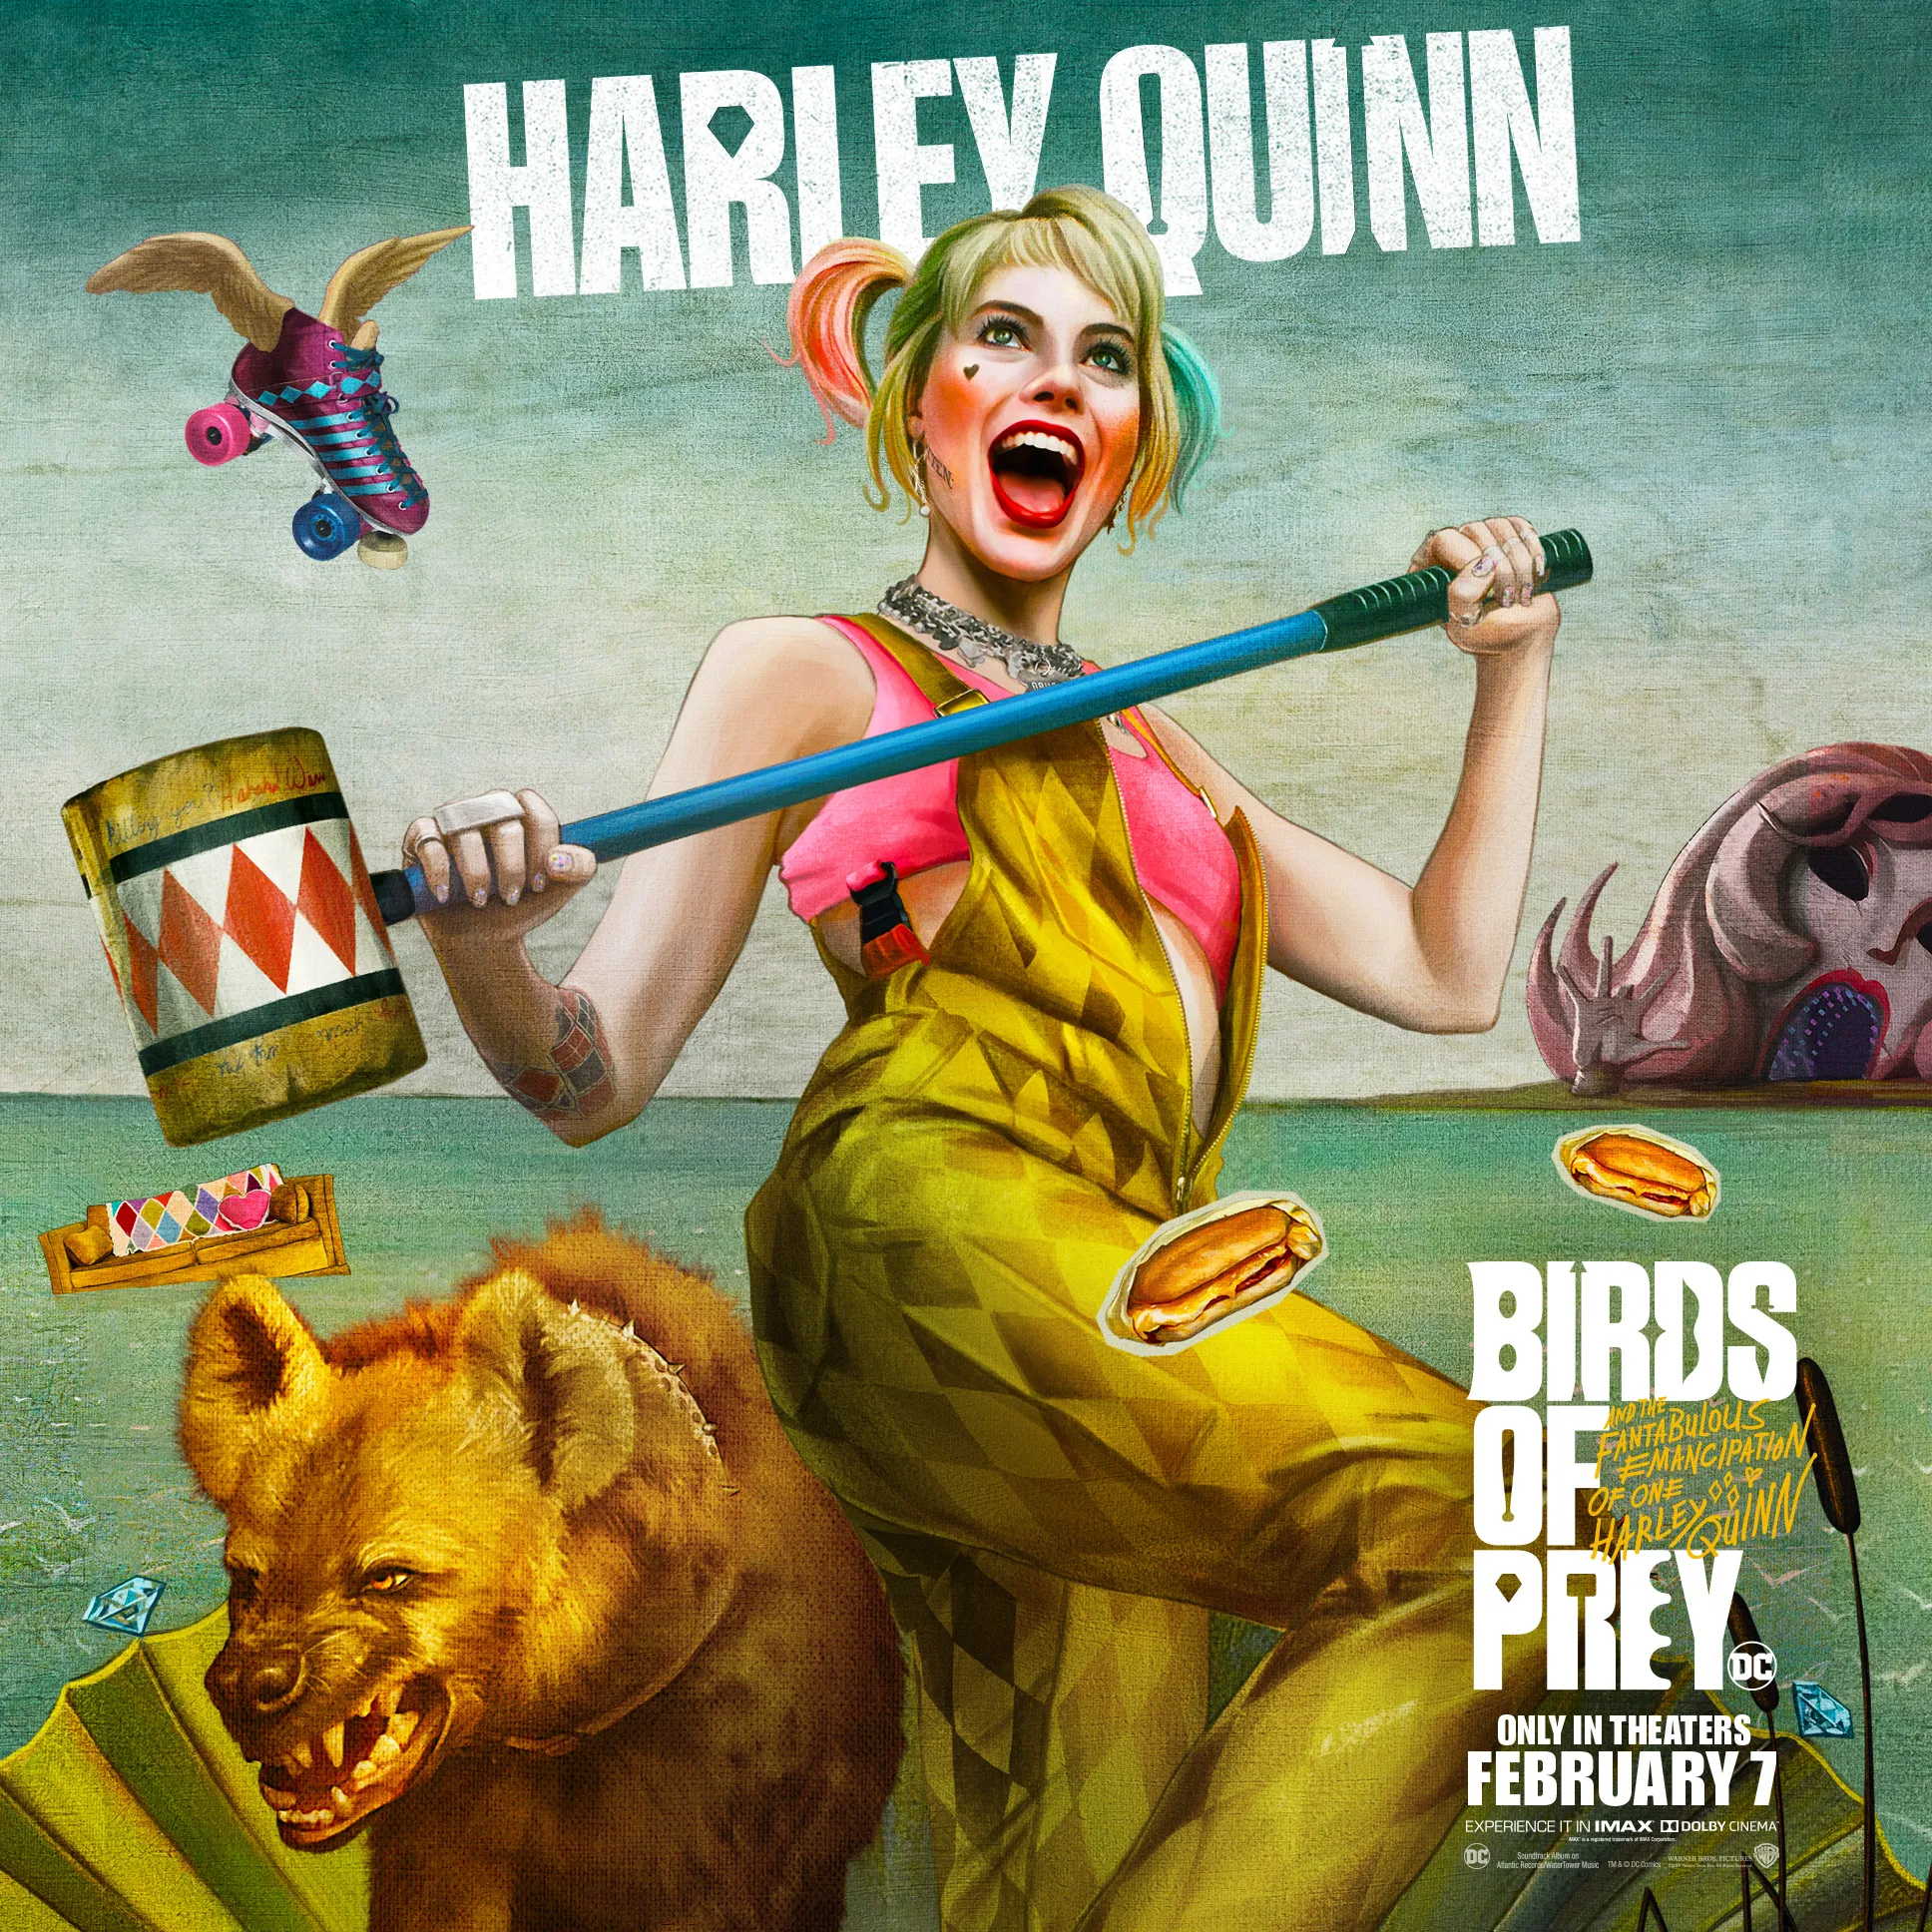 Birds of Prey (and the Fantabulous Emancipation of One Harley Quinn) (Other)